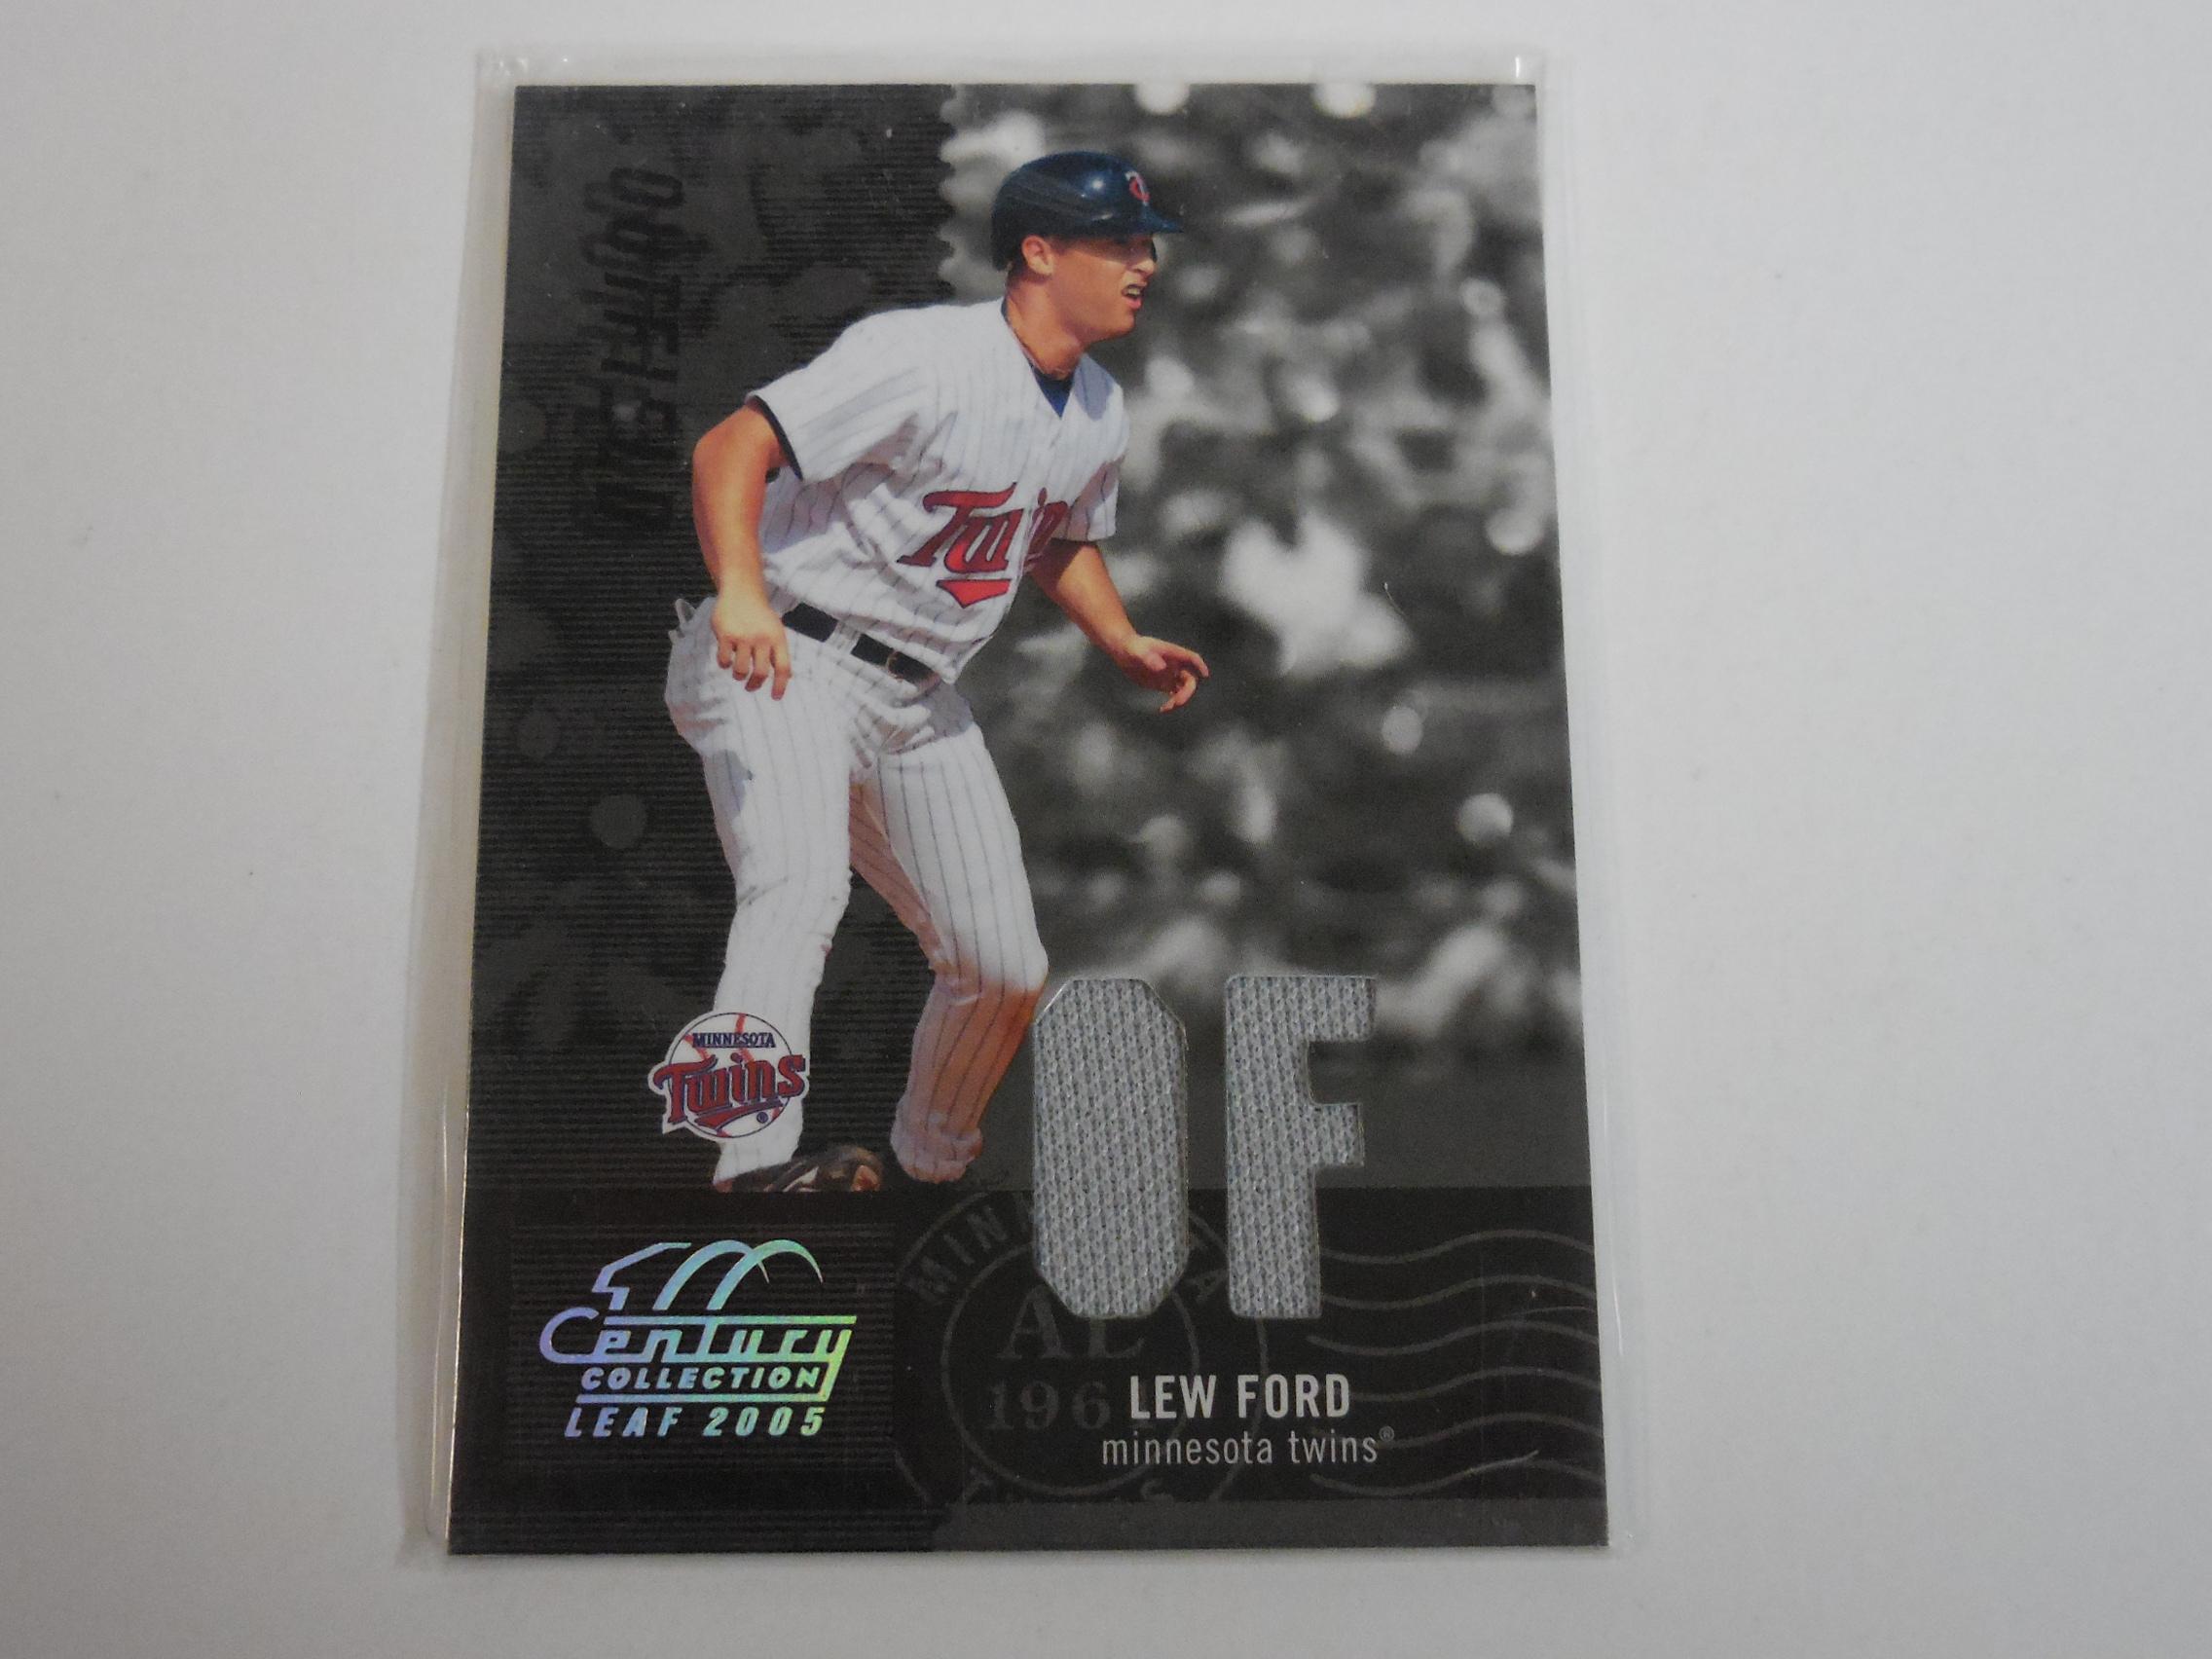 2005 LEAF CENTURY COLLECTION LEW FORD GAME USED JERSEY CARD